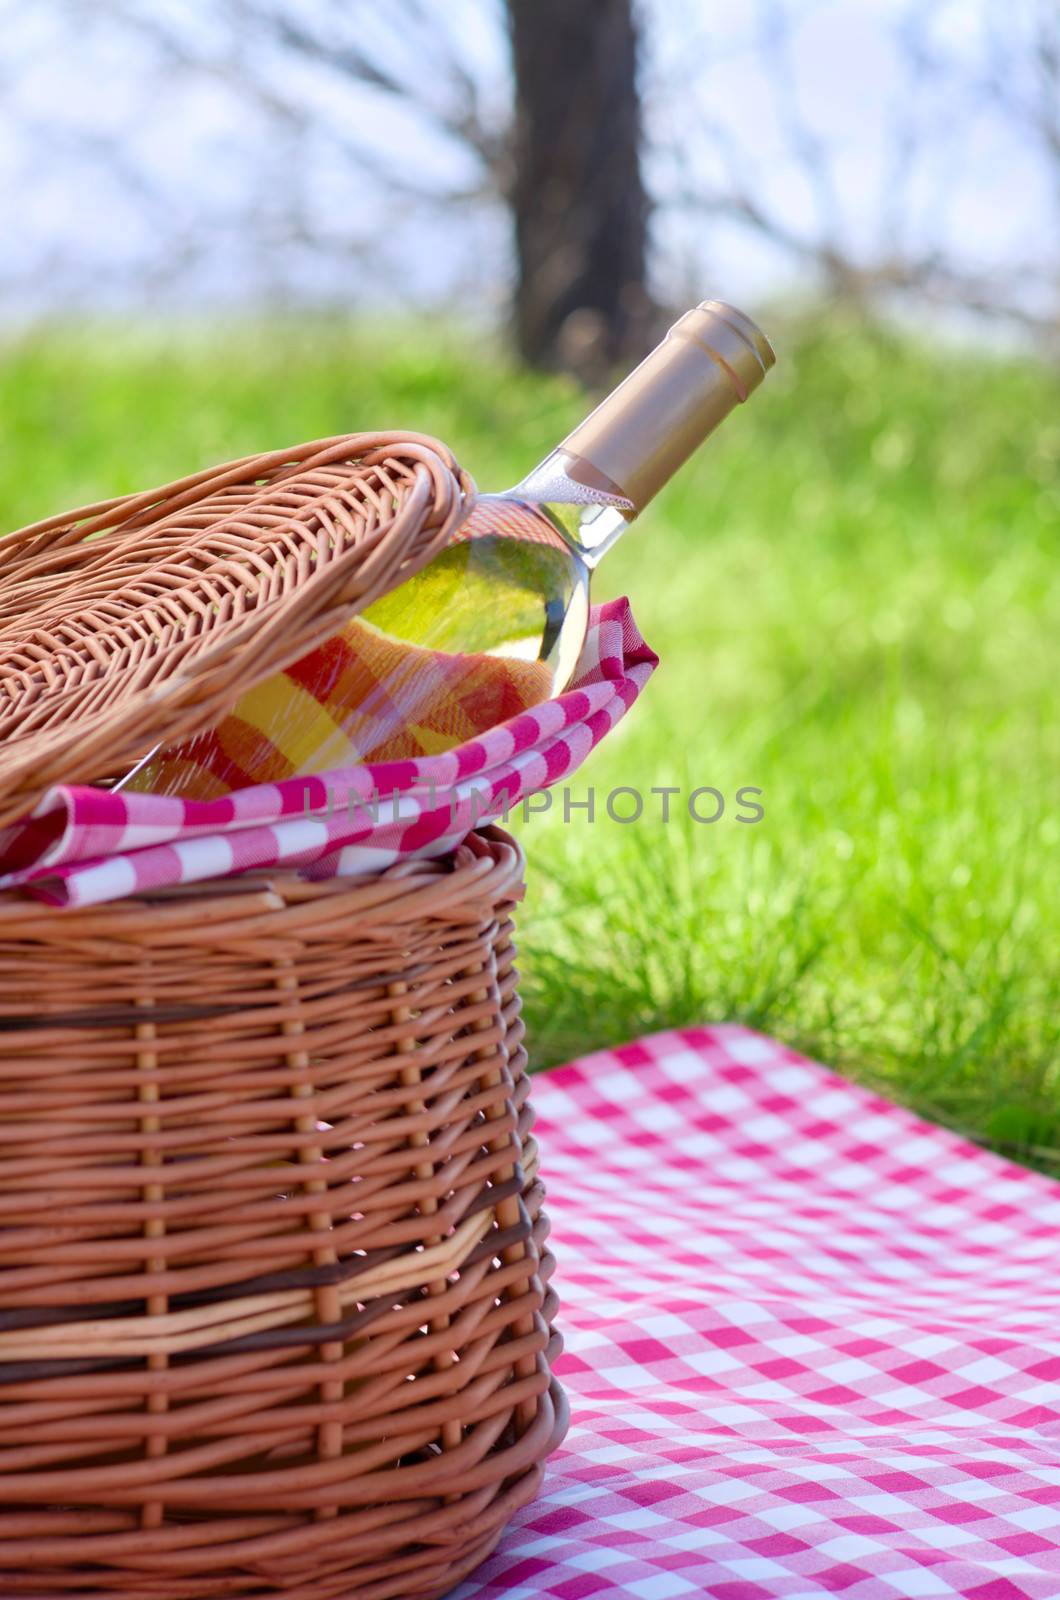 Picnic basket with bottle of wine by rbv